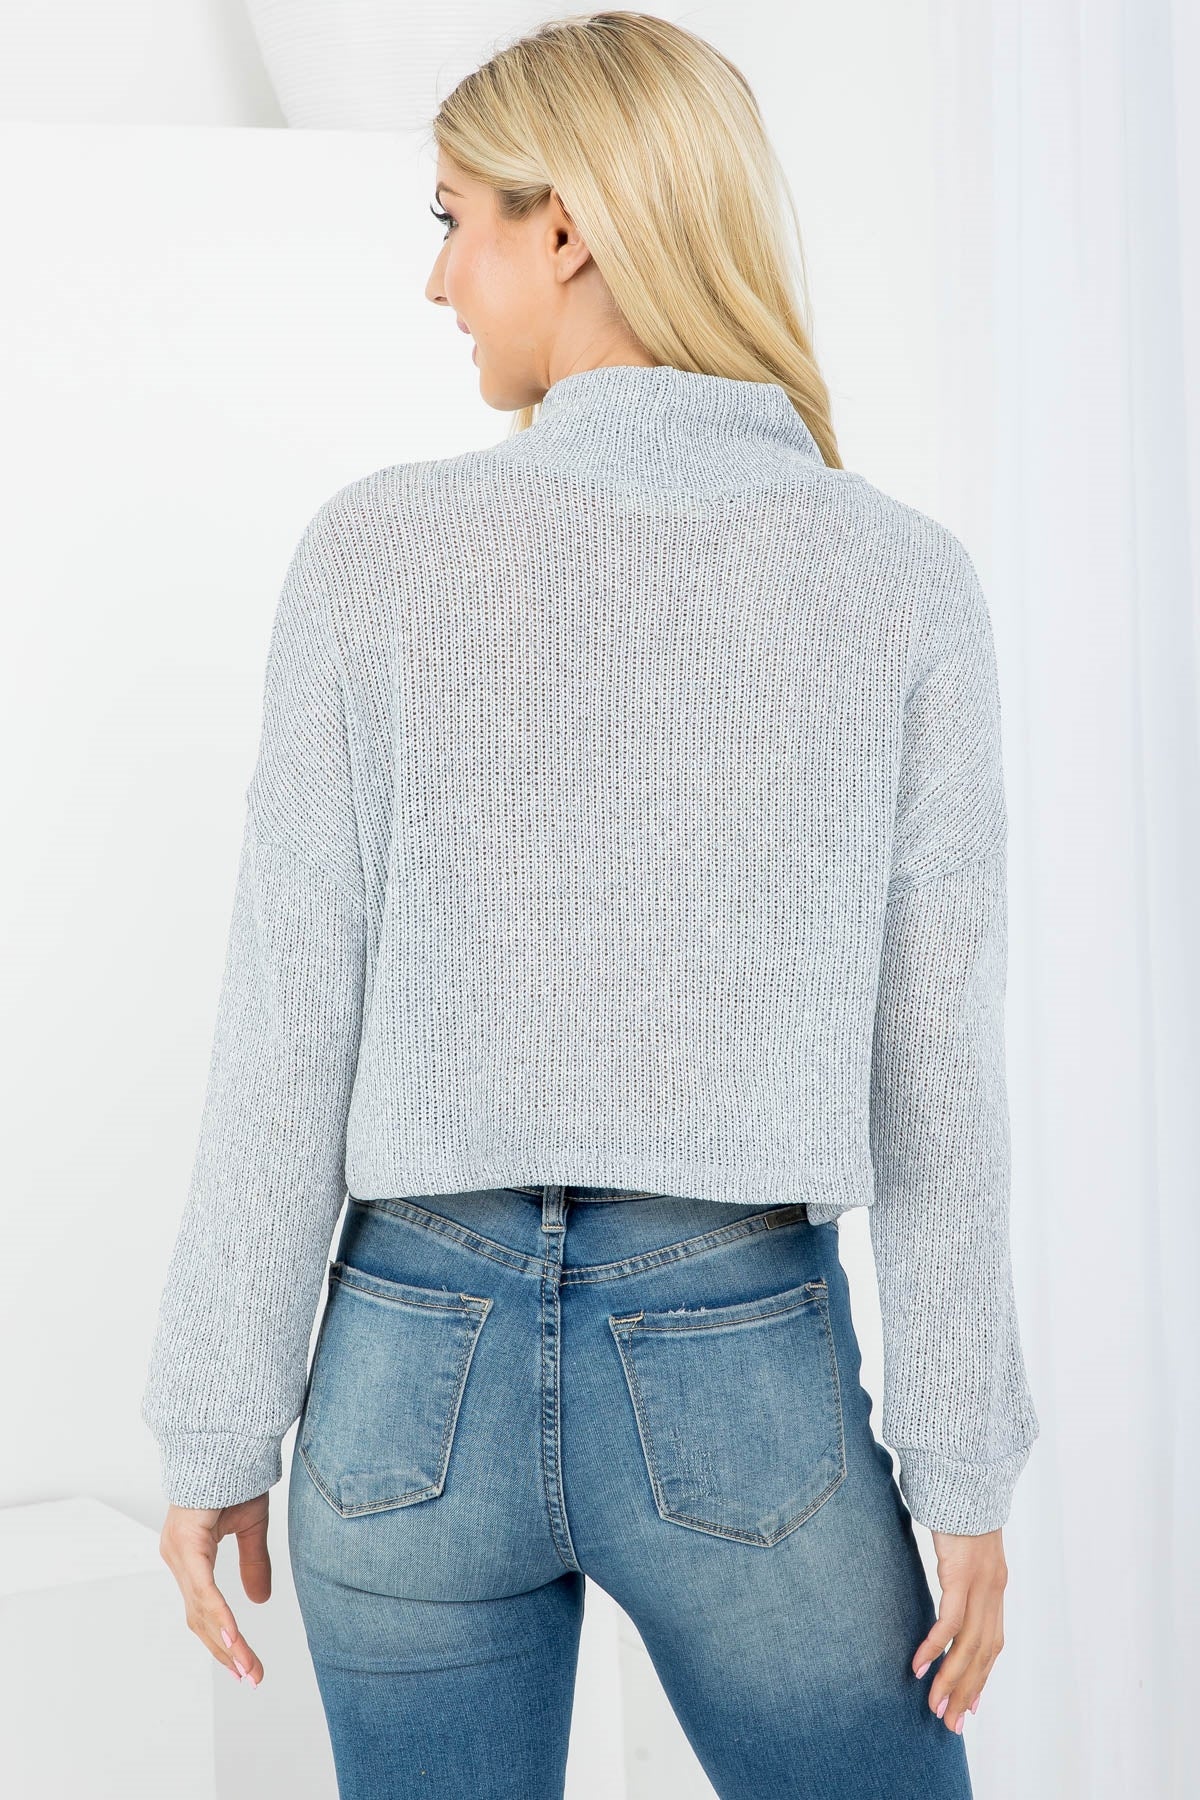 GRAY COWL NECKLINE CUFFED LONG SLEEVE KNITTED TOP (NOW $3.50 ONLY!)